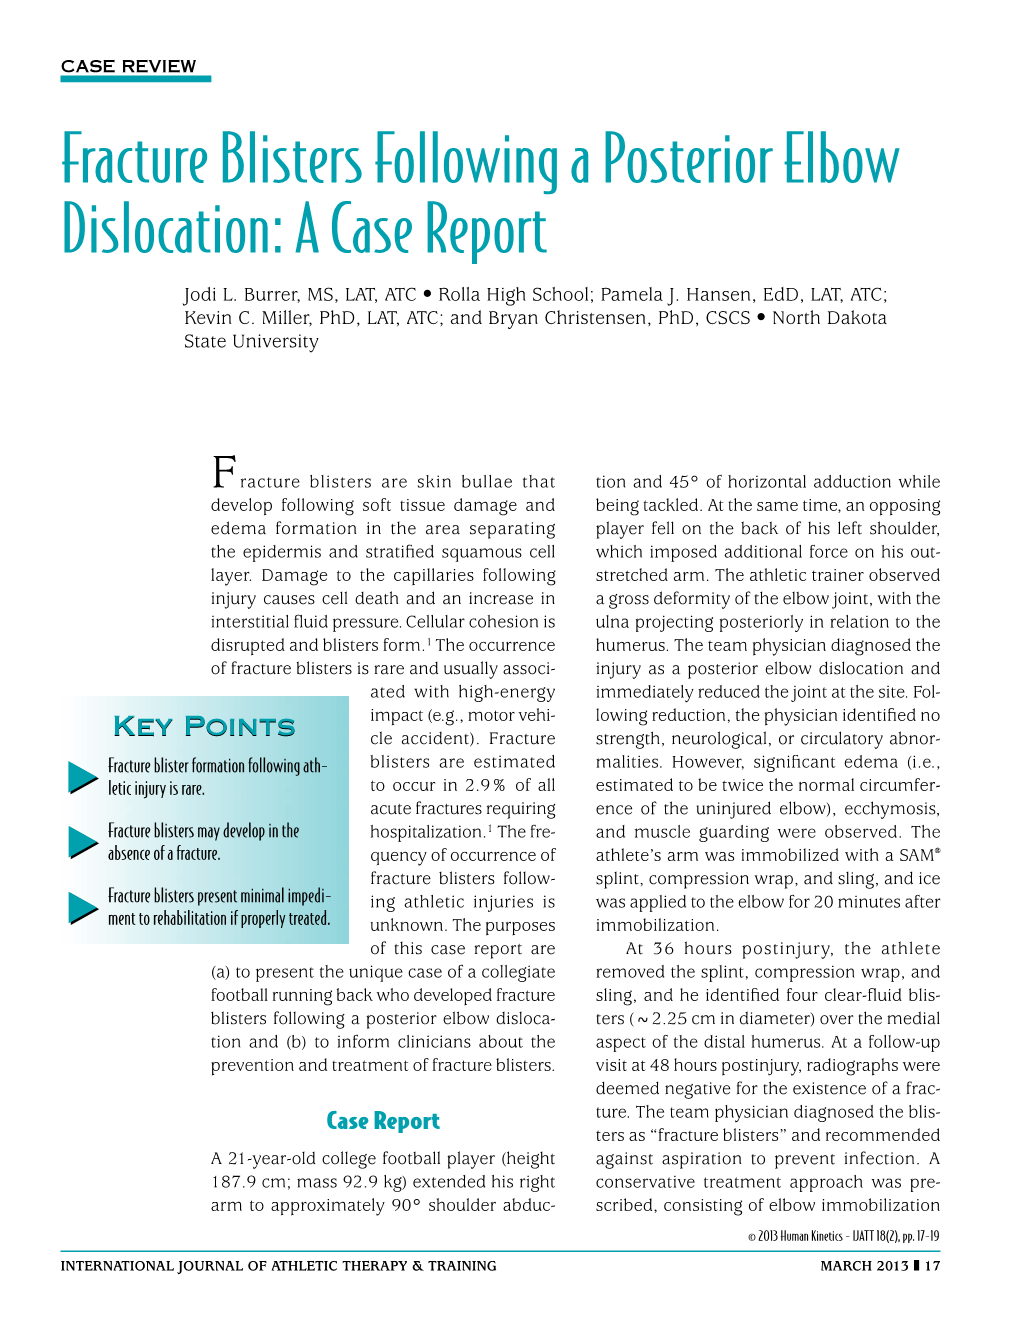 Fracture Blisters Following a Posterior Elbow Dislocation: a Case Report